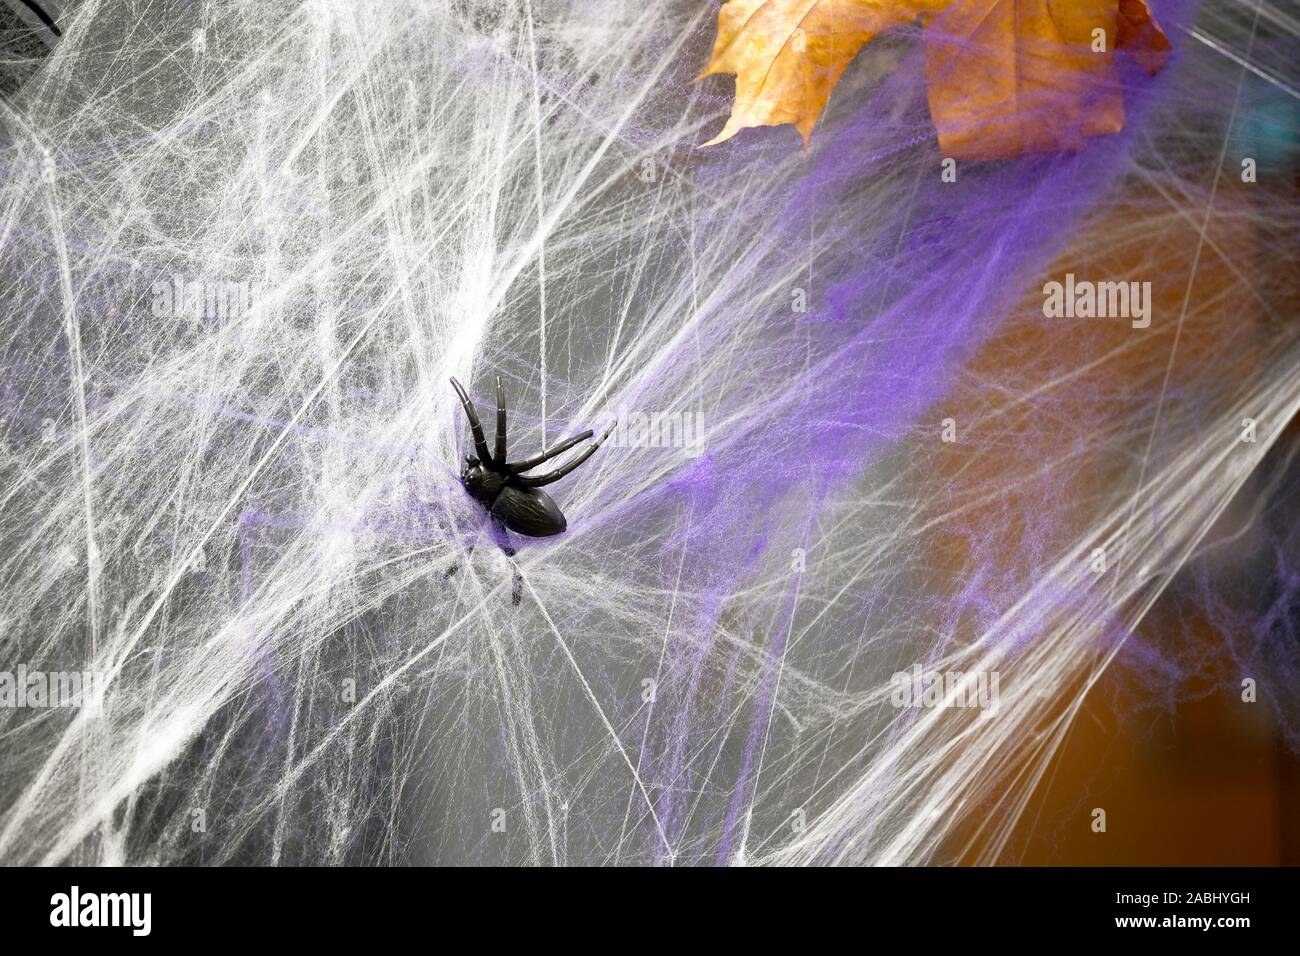 Window dressing for Halloween. The black spider is tangled in an artificial web. Preparations for the celebration of Halloween. Stock Photo